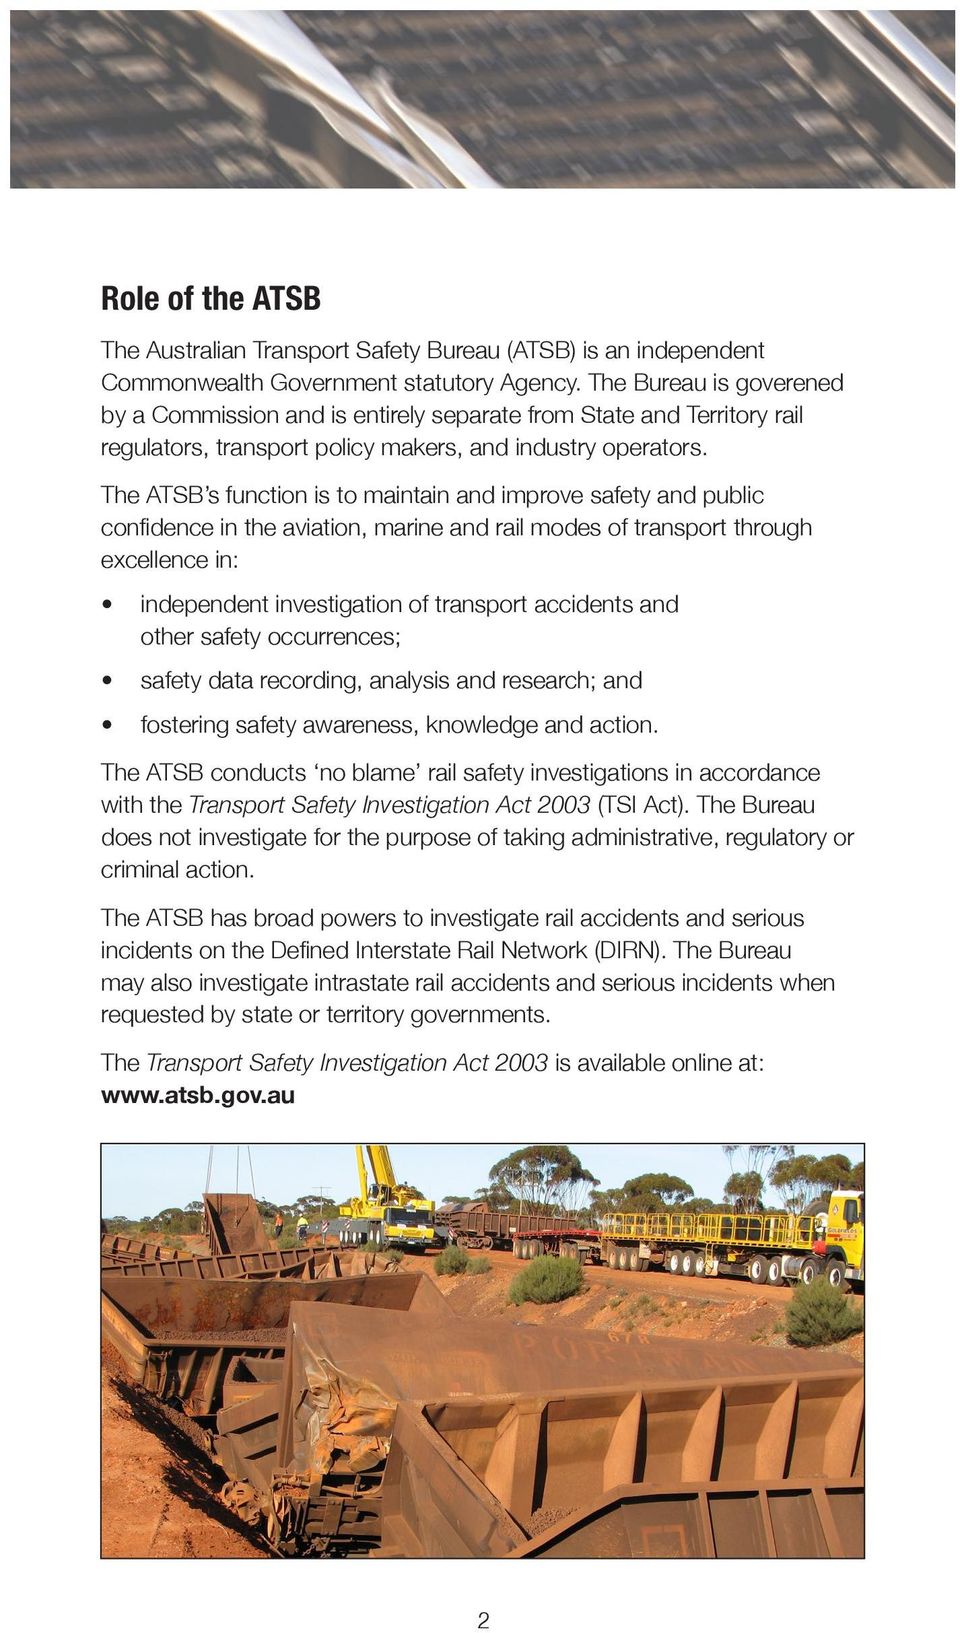 The ATSB s function is to maintain and improve safety and public confidence in the aviation, marine and rail modes of transport through excellence in: independent investigation of transport accidents